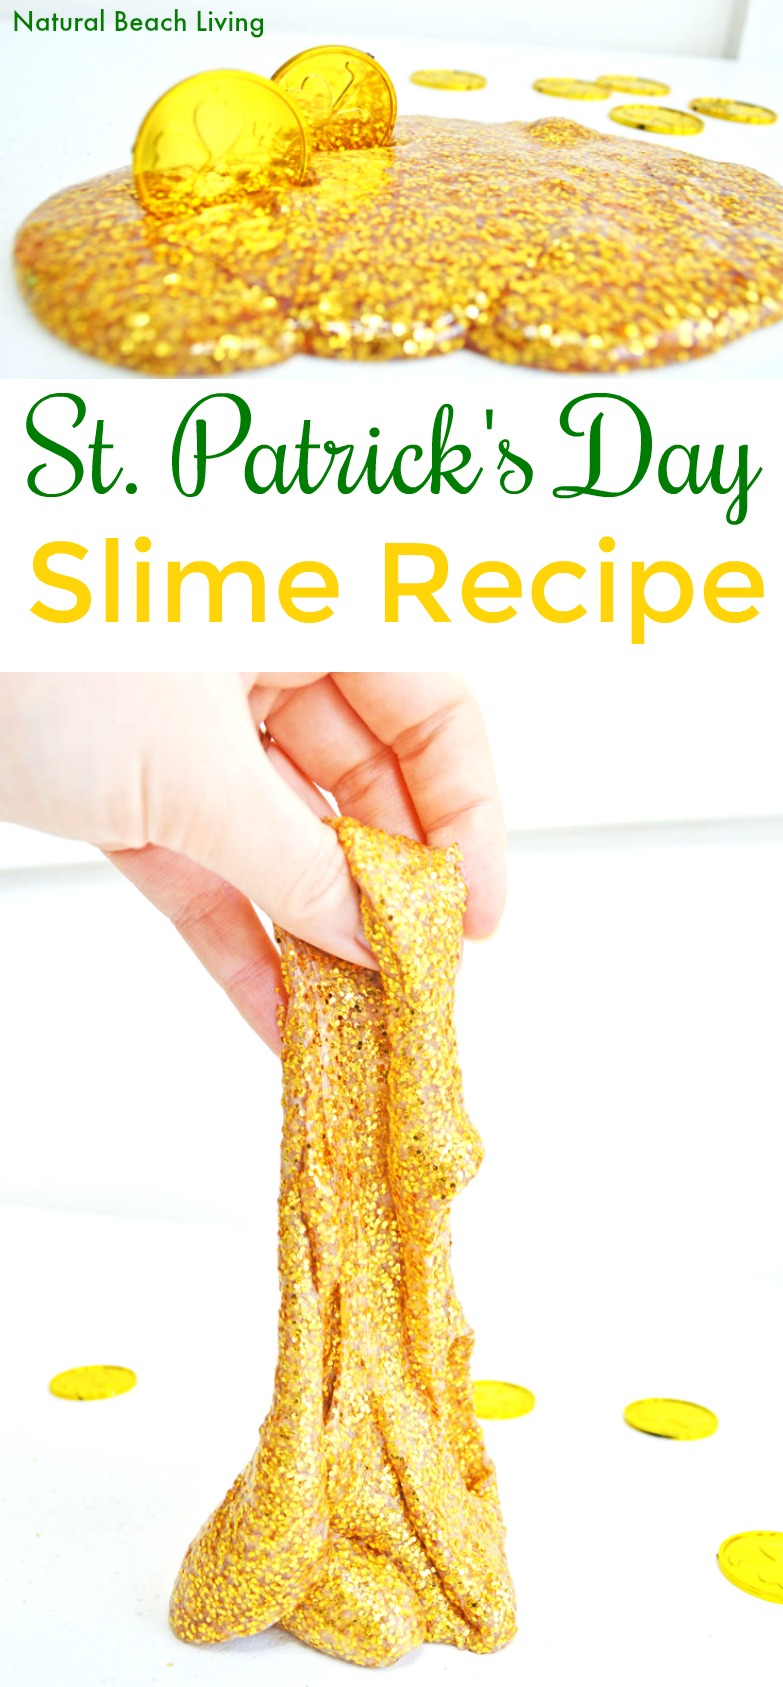 How to Make Slime Recipe with Contact Solution that's perfect for St. Patrick's Day Sensory play, This Perfect Gold Glitter Contact Solution Slime Recipe! Homemade slime is super easy to make with our slime recipes. See how to make slime with contact solution and The Best Slime Recipes here.